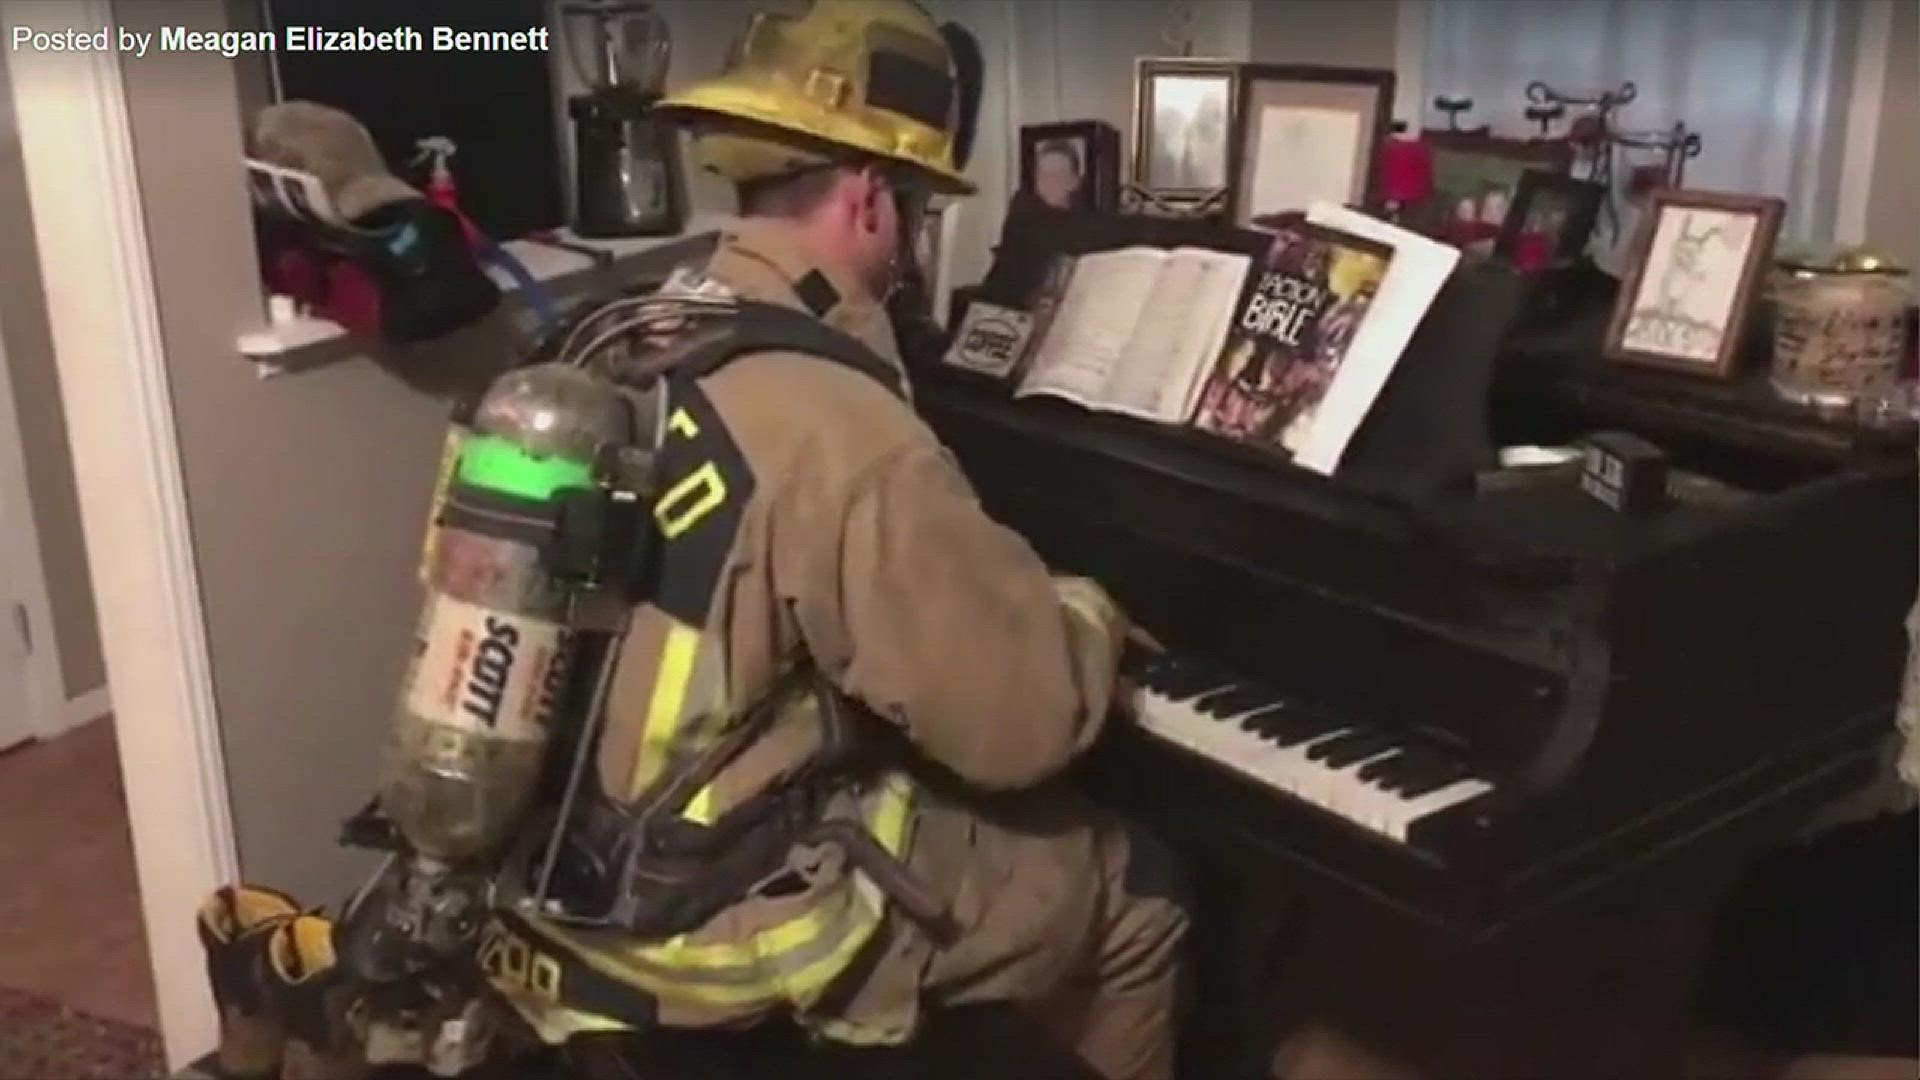 Firefighter Bryan Kerr helps keep Monroe residents safe AND entertained. Thanks to Snohomish County Fire District 7 for excellent service and to Meagan Bennett for sharing this video.